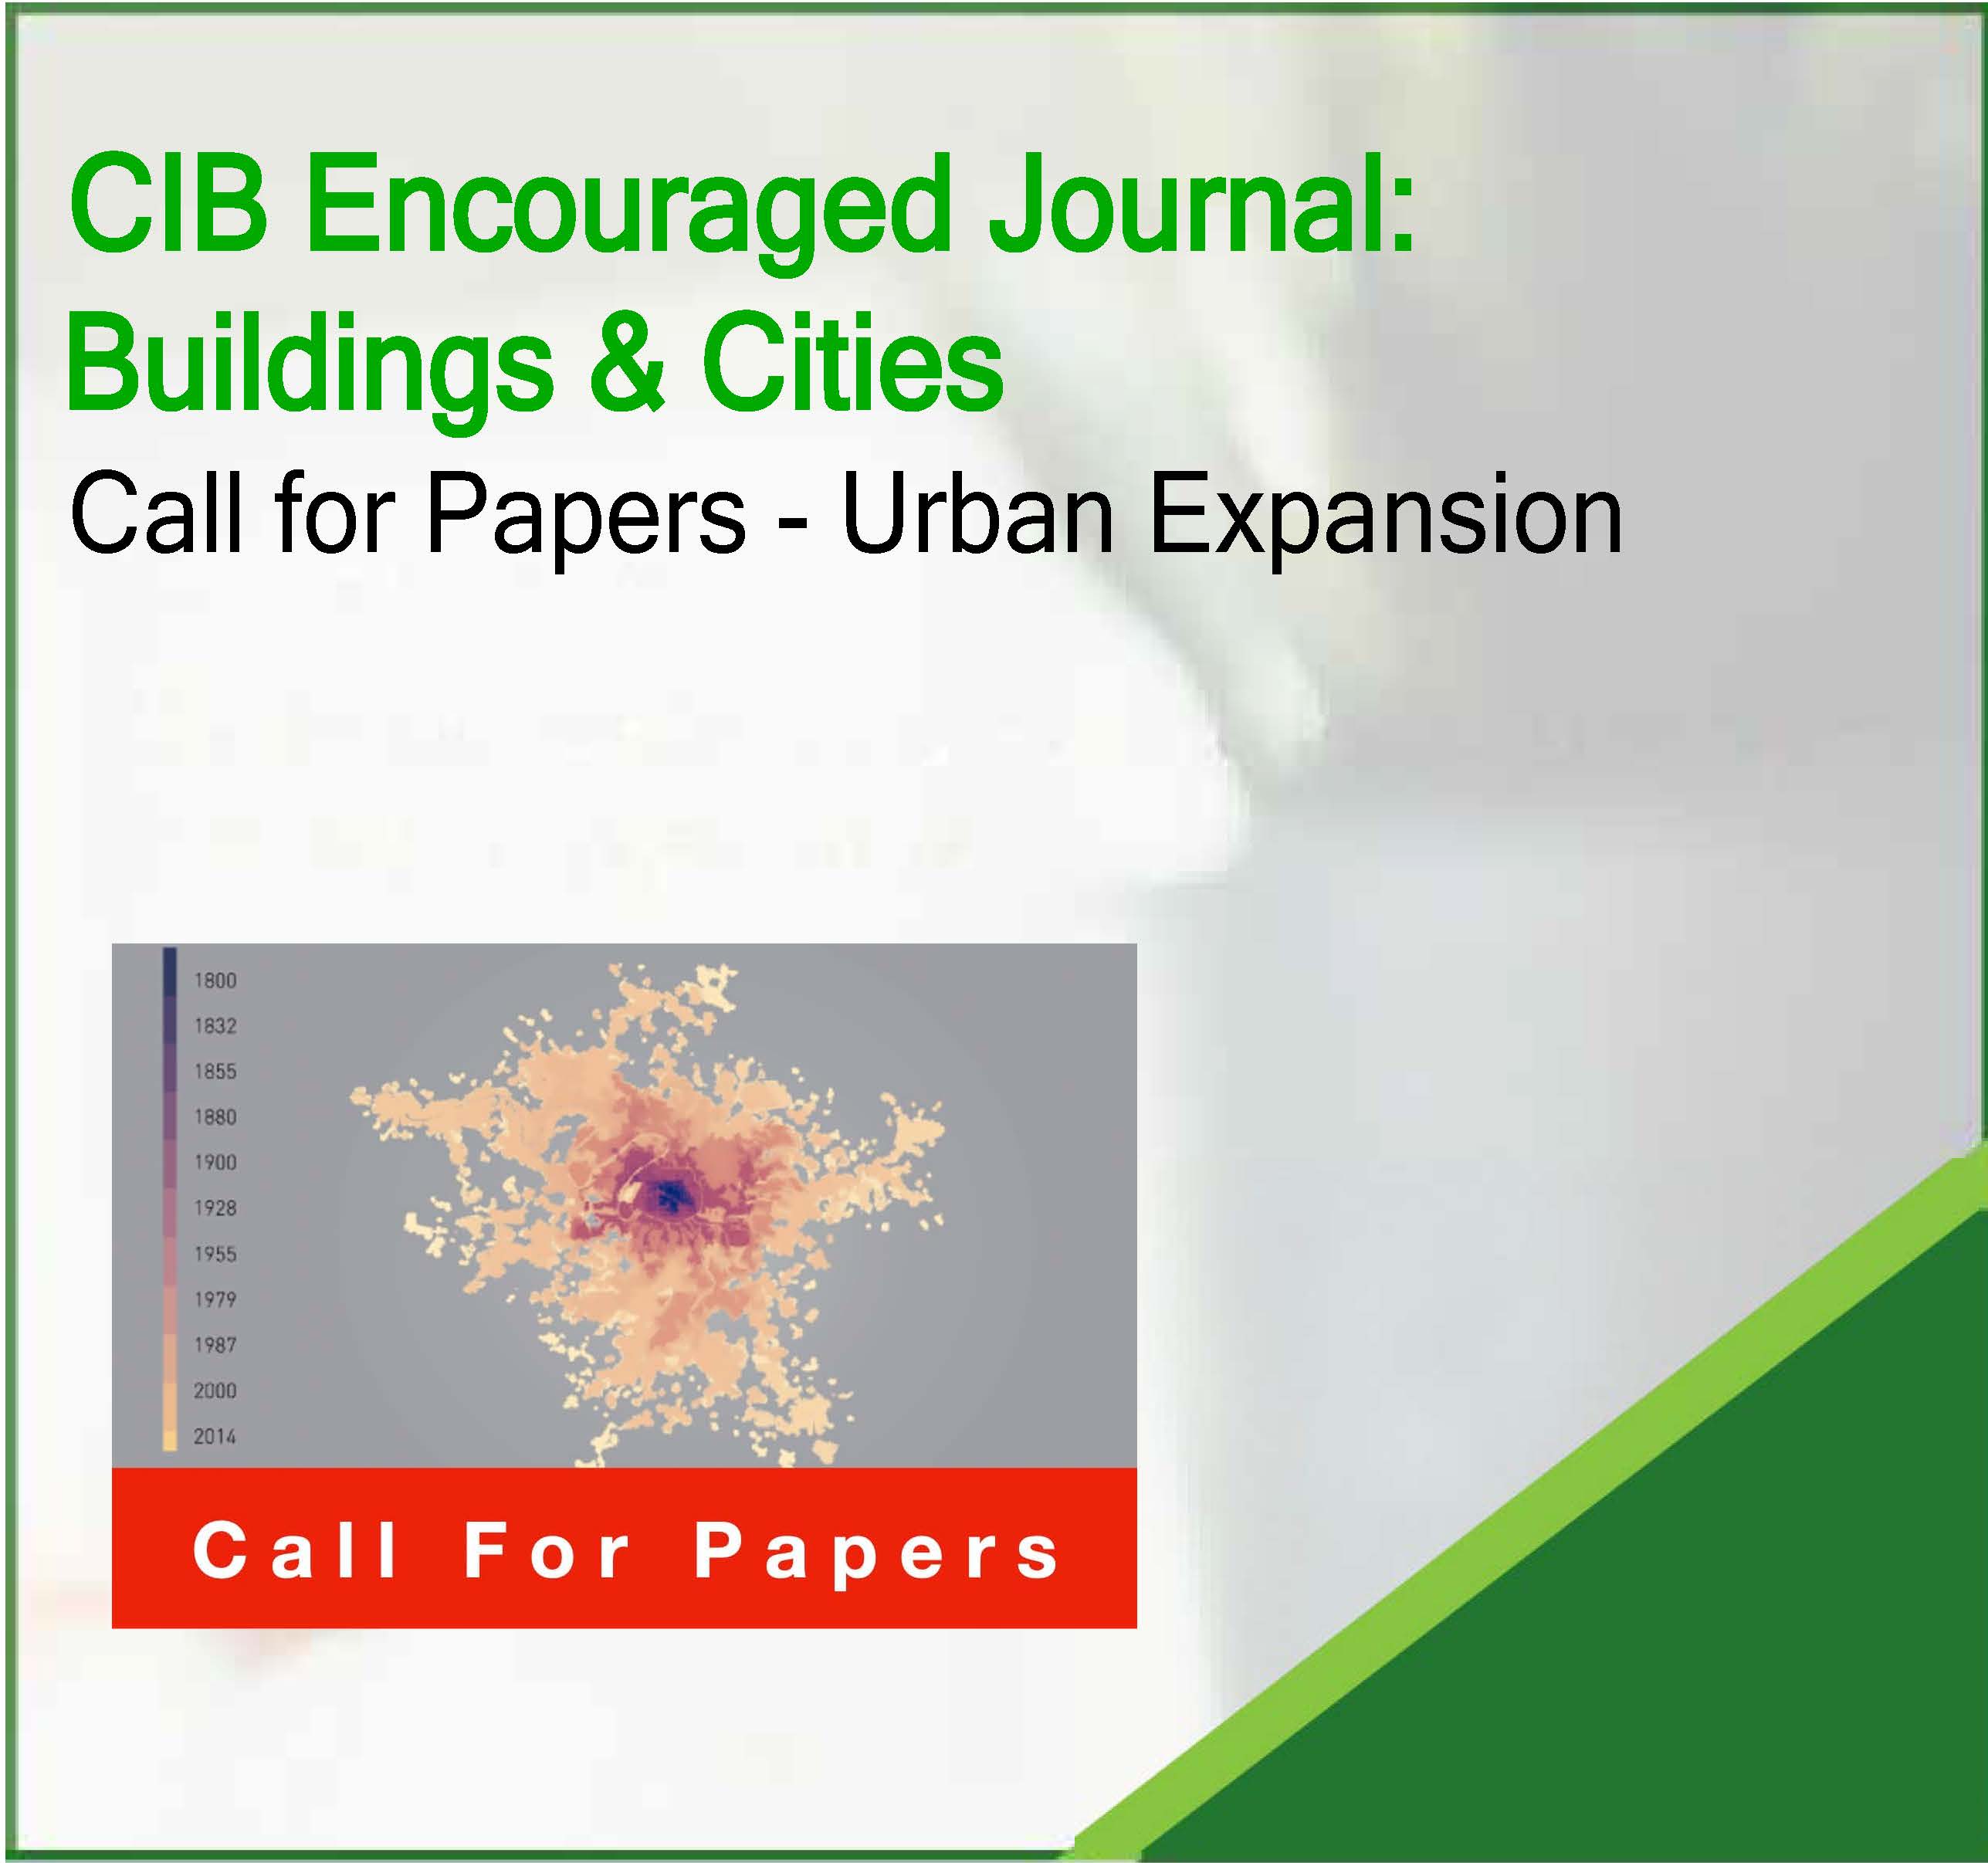 Call for Papers: Urban Expansion Deadline 3 December 2021